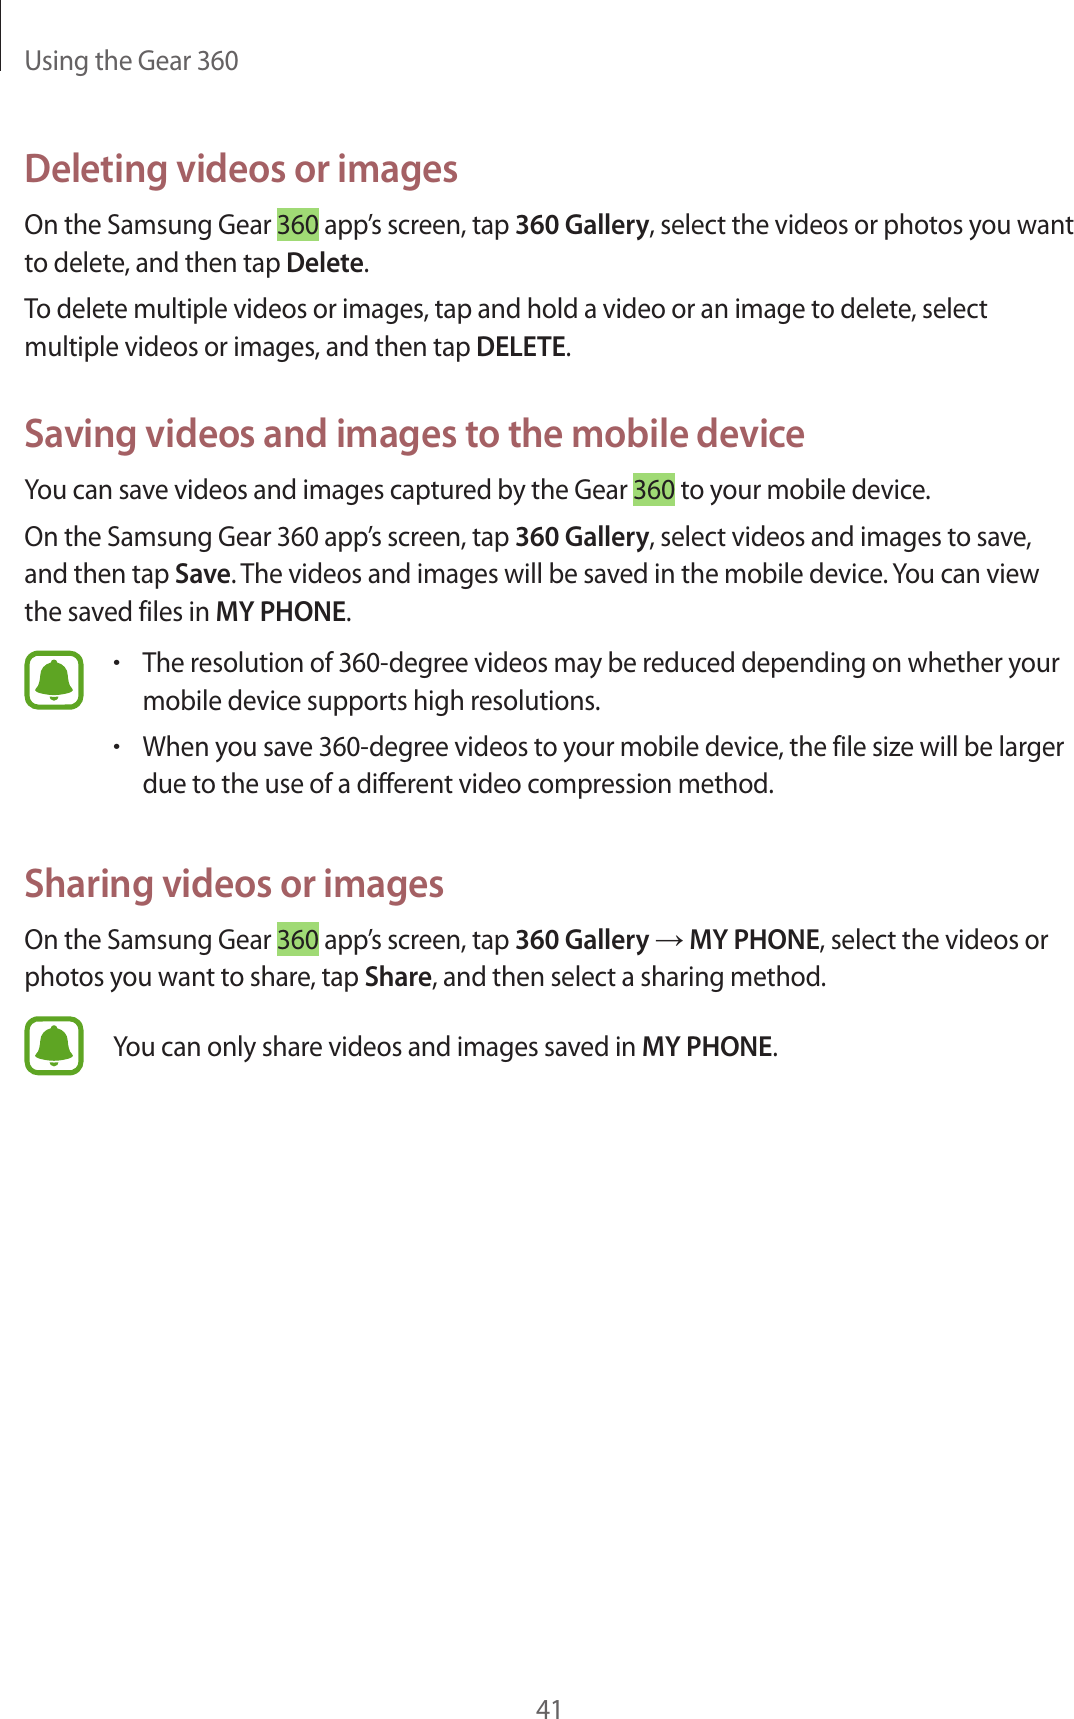 Using the Gear 36041Deleting videos or imagesOn the Samsung Gear 360 app’s screen, tap 360 Gallery, select the videos or photos you want to delete, and then tap Delete.To delete multiple videos or images, tap and hold a video or an image to delete, select multiple videos or images, and then tap DELETE.Saving videos and images to the mobile deviceYou can save videos and images captured by the Gear 360 to your mobile device.On the Samsung Gear 360 app’s screen, tap 360 Gallery, select videos and images to save, and then tap Save. The videos and images will be saved in the mobile device. You can view the saved files in MY PHONE.•The resolution of 360-degree videos may be reduced depending on whether your mobile device supports high resolutions.•When you save 360-degree videos to your mobile device, the file size will be larger due to the use of a different video compression method.Sharing videos or imagesOn the Samsung Gear 360 app’s screen, tap 360 Gallery → MY PHONE, select the videos or photos you want to share, tap Share, and then select a sharing method.You can only share videos and images saved in MY PHONE.